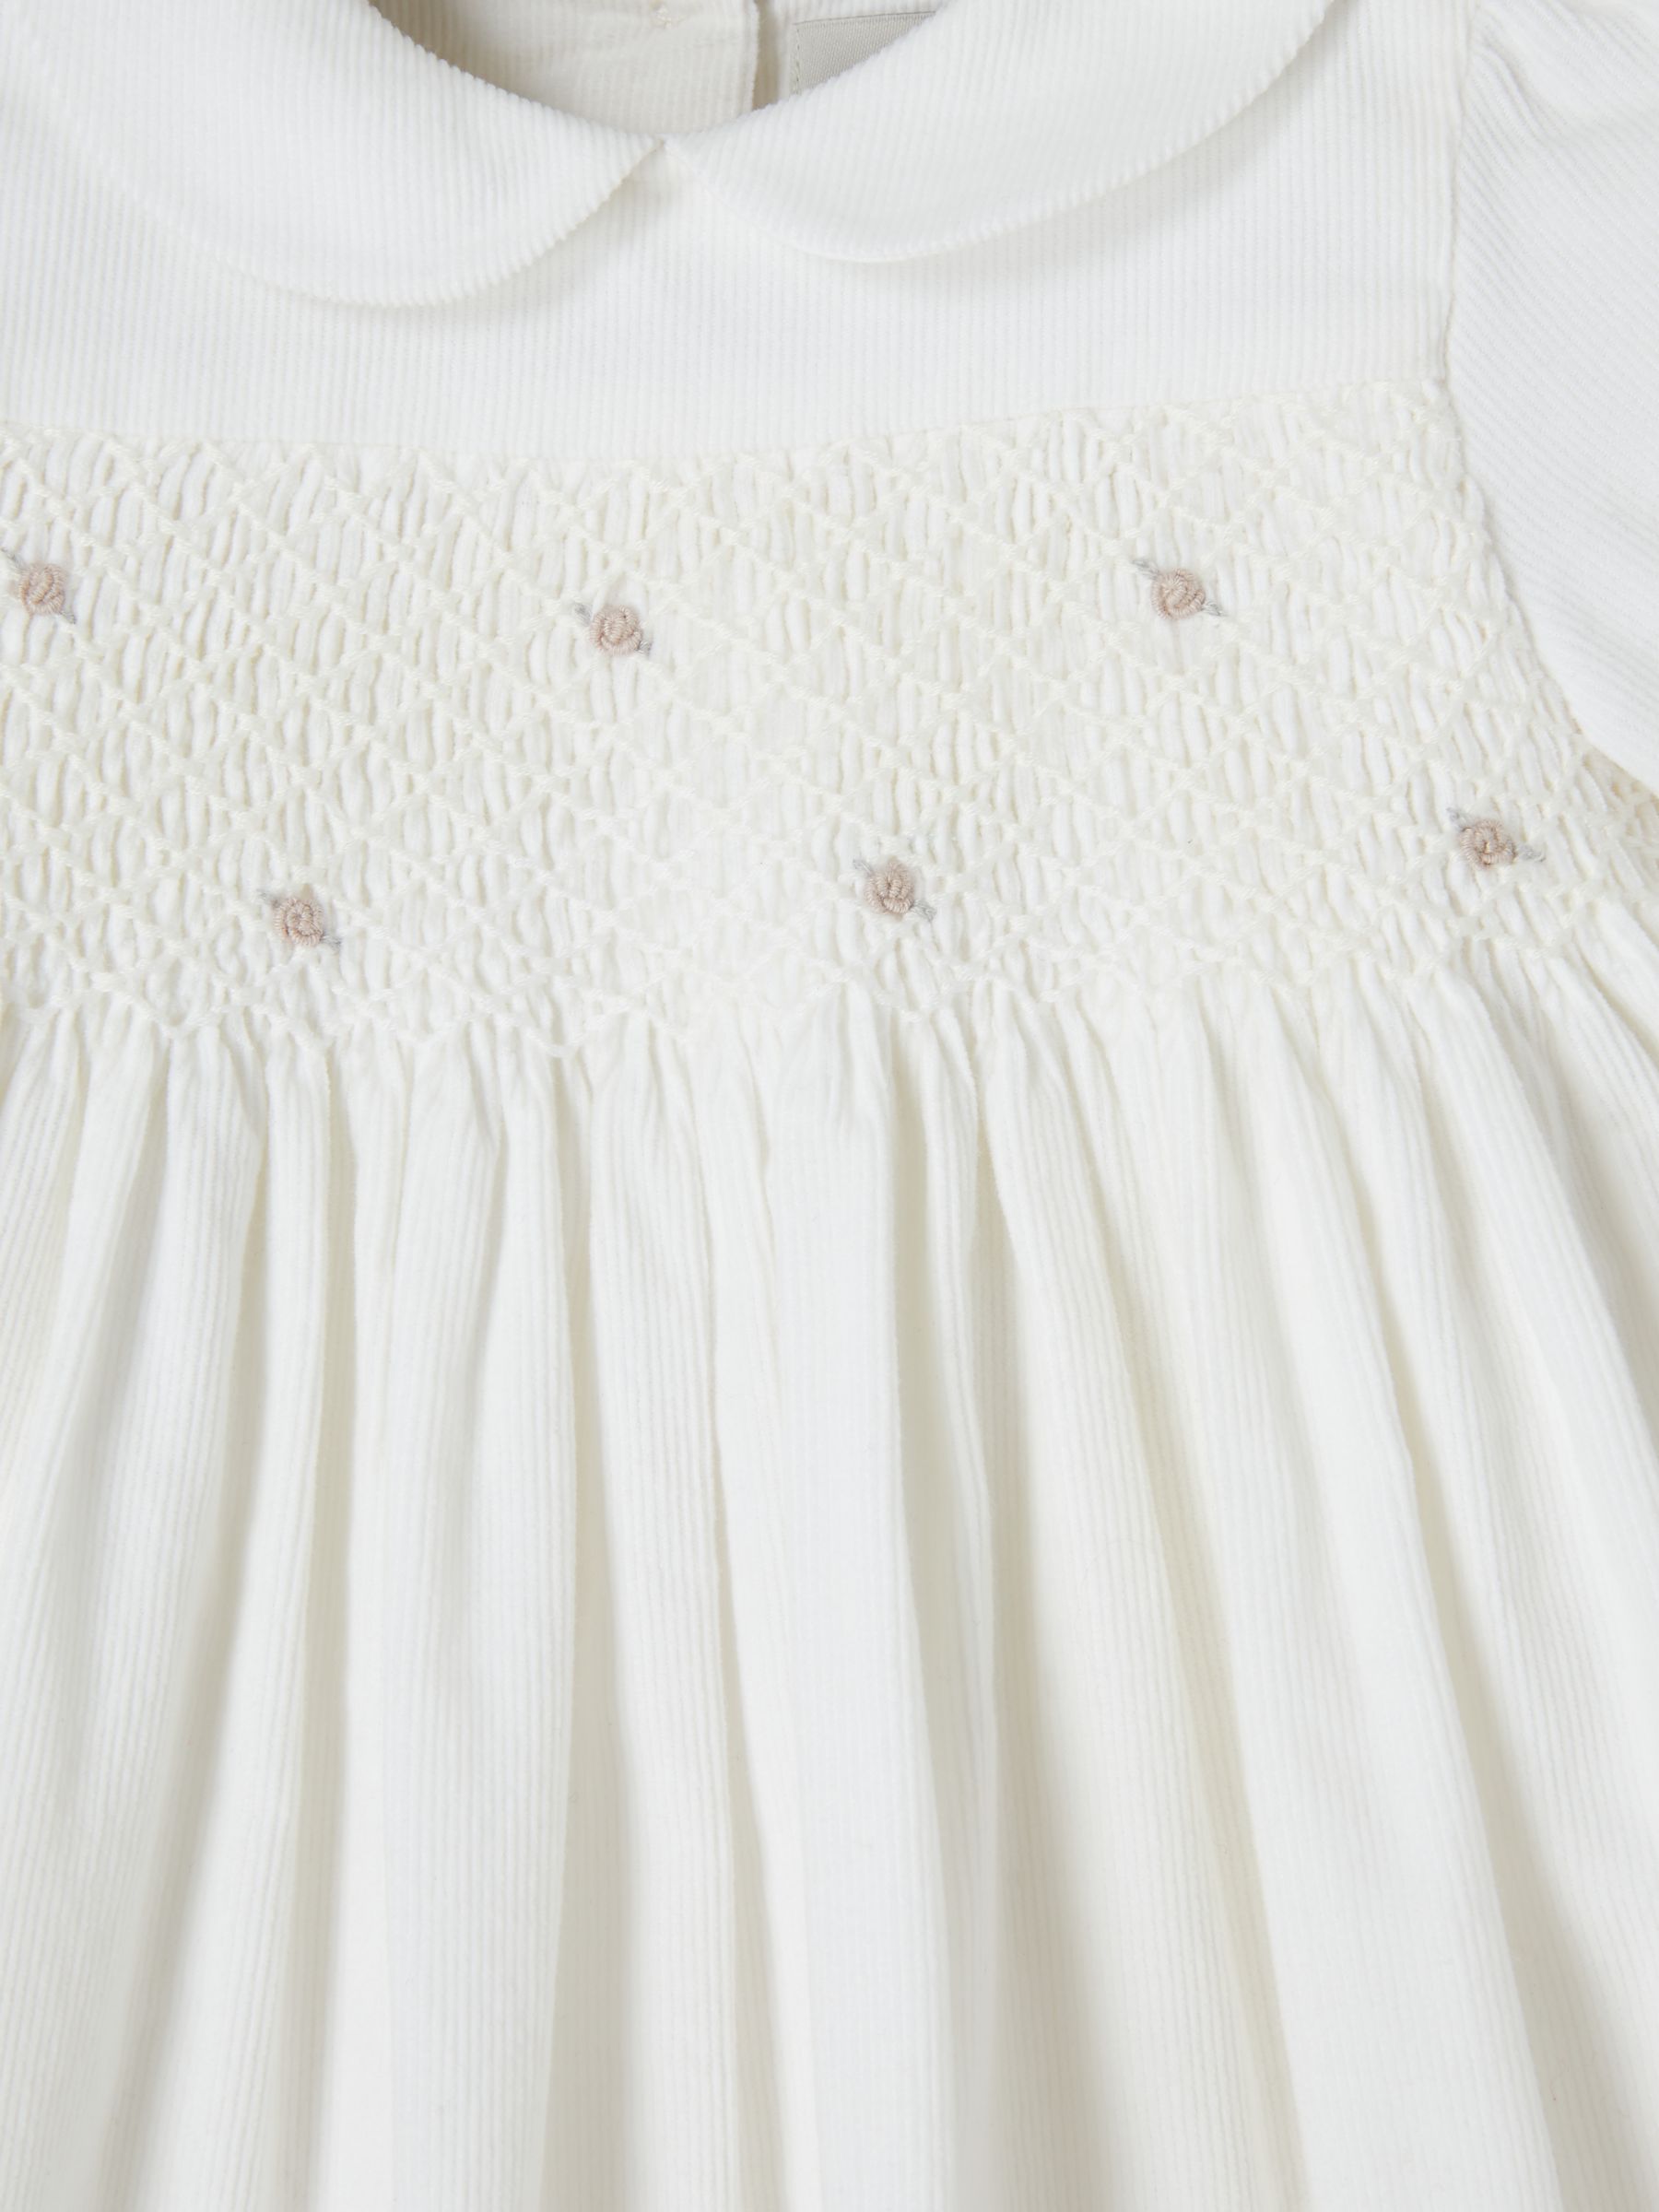 Buy John Lewis Heirloom Collection Baby Cord Dress, White Online at johnlewis.com